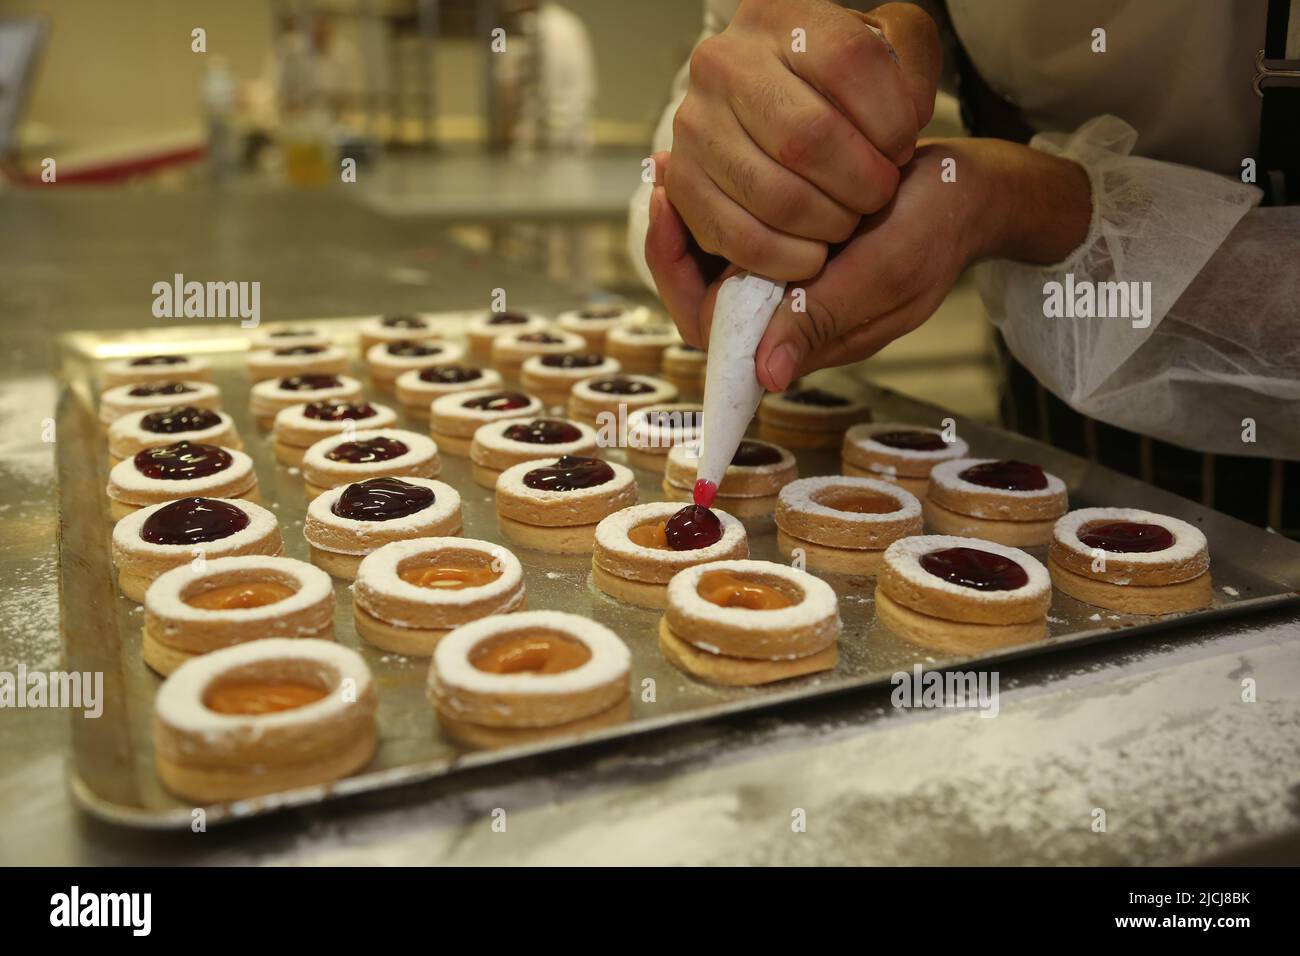 Chef making 'Mini Tartlets' on the bakery shop table. Stock Photo